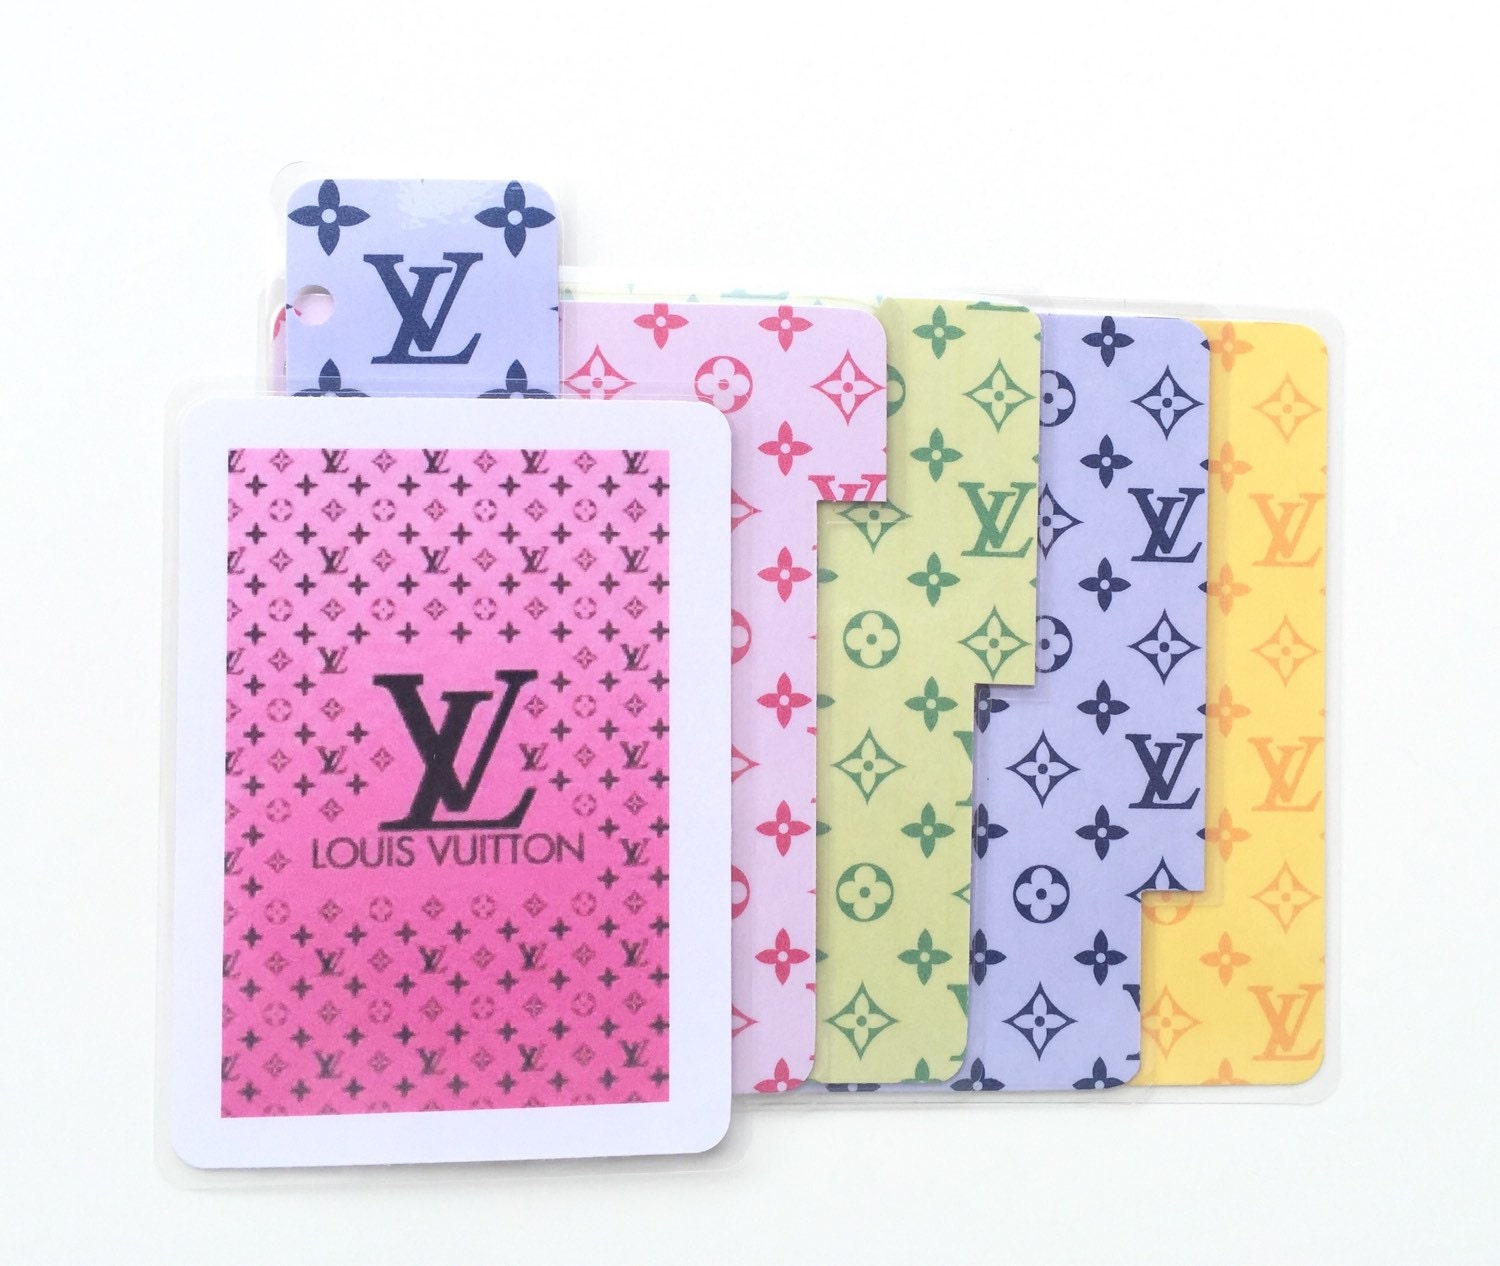 Louis Vuitton Planner Package. Dividers / inserts